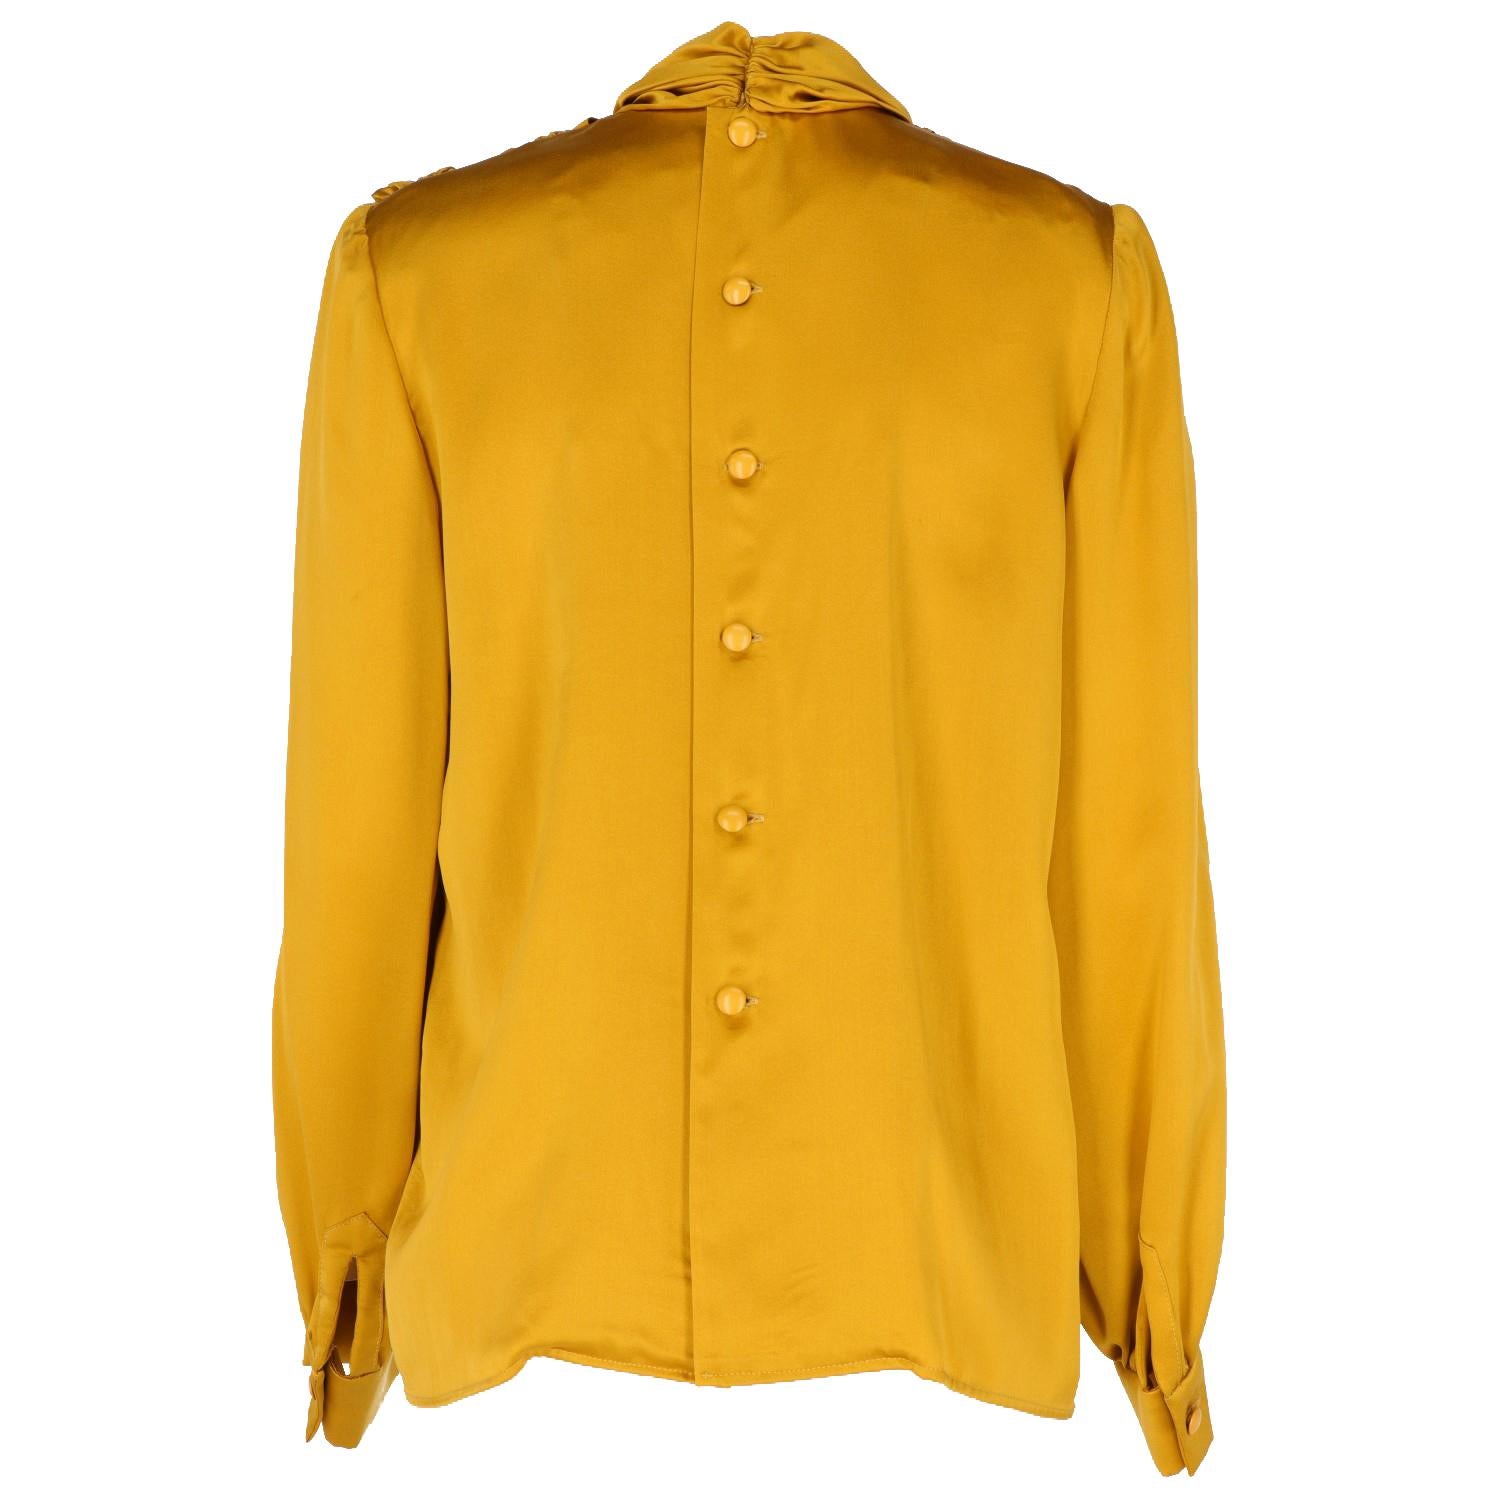 Pierre Balmain Ivoire blouse in yellow gold silk with back buttoned fastening and triple frontal drapery. It is vintage 80s in perfect condition

Size: 40FR

Height: 61 cm
Bust: 49 cm
Sleeve: 61 cm
Shoulders: 38 cm